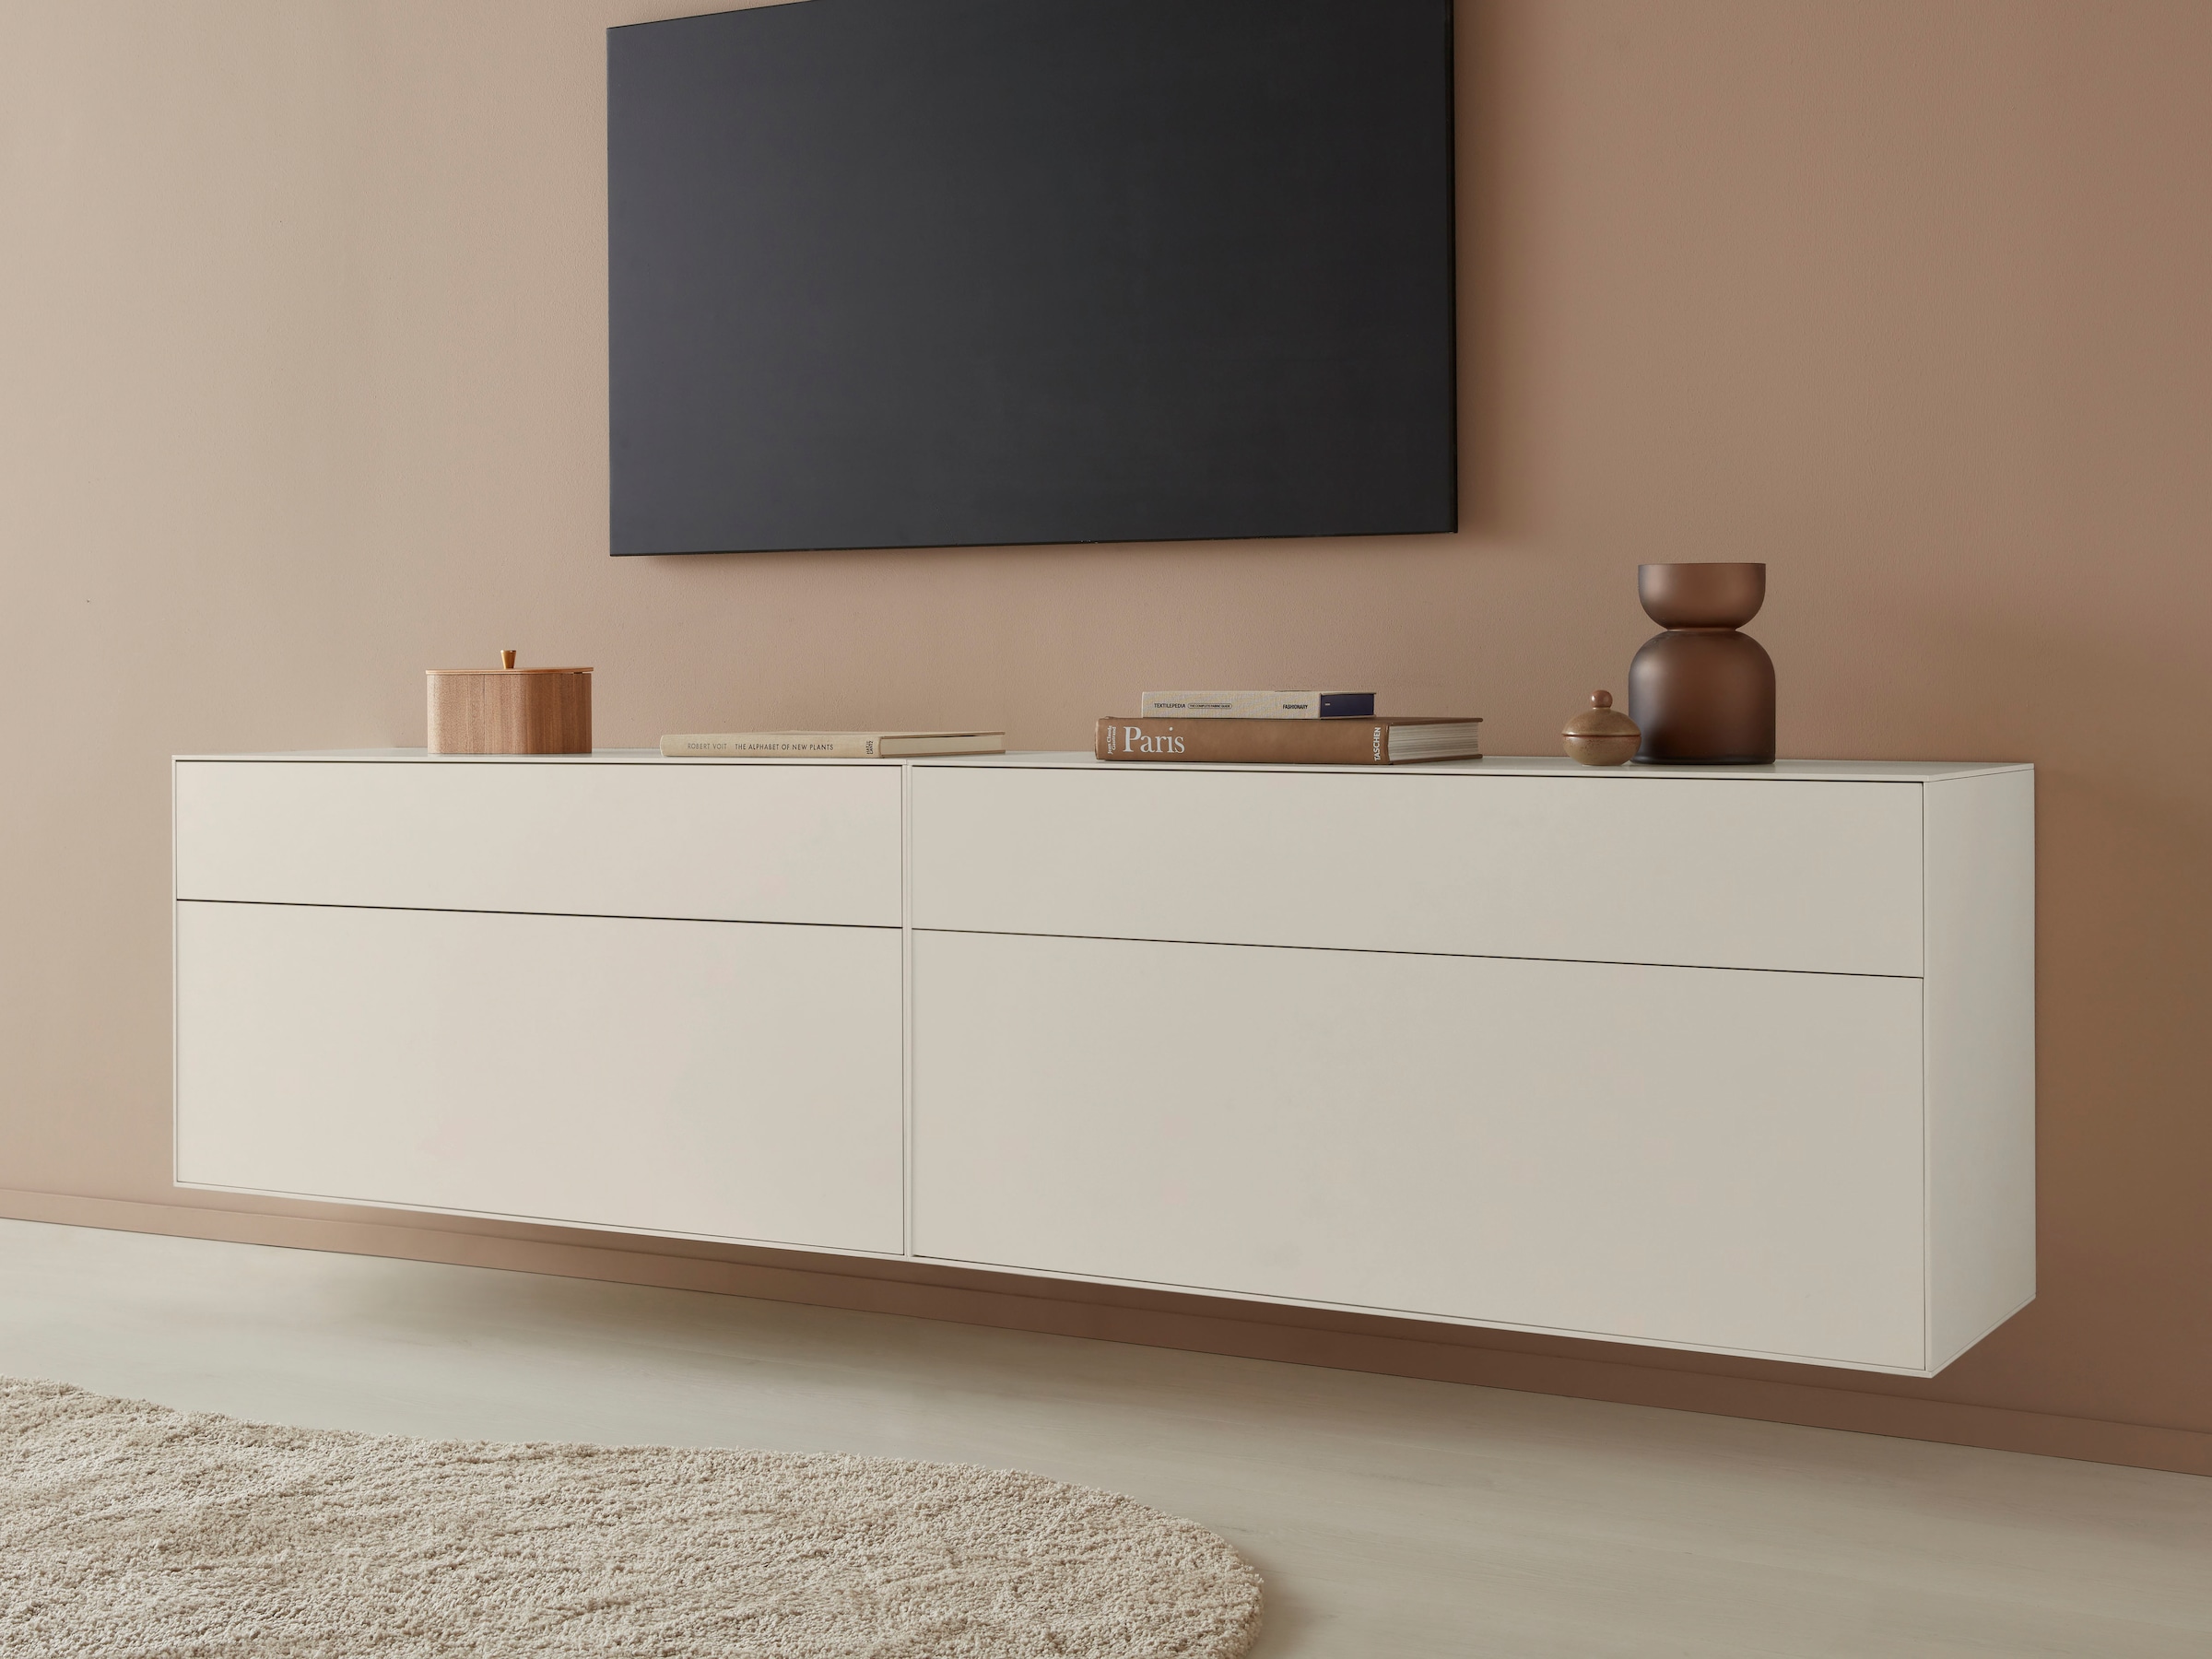 LeGer Home by Lena Gercke Lowboard »Essentials«, (2 St.), Breite: 224cm, MDF lackiert, Push-to-open-Funktion